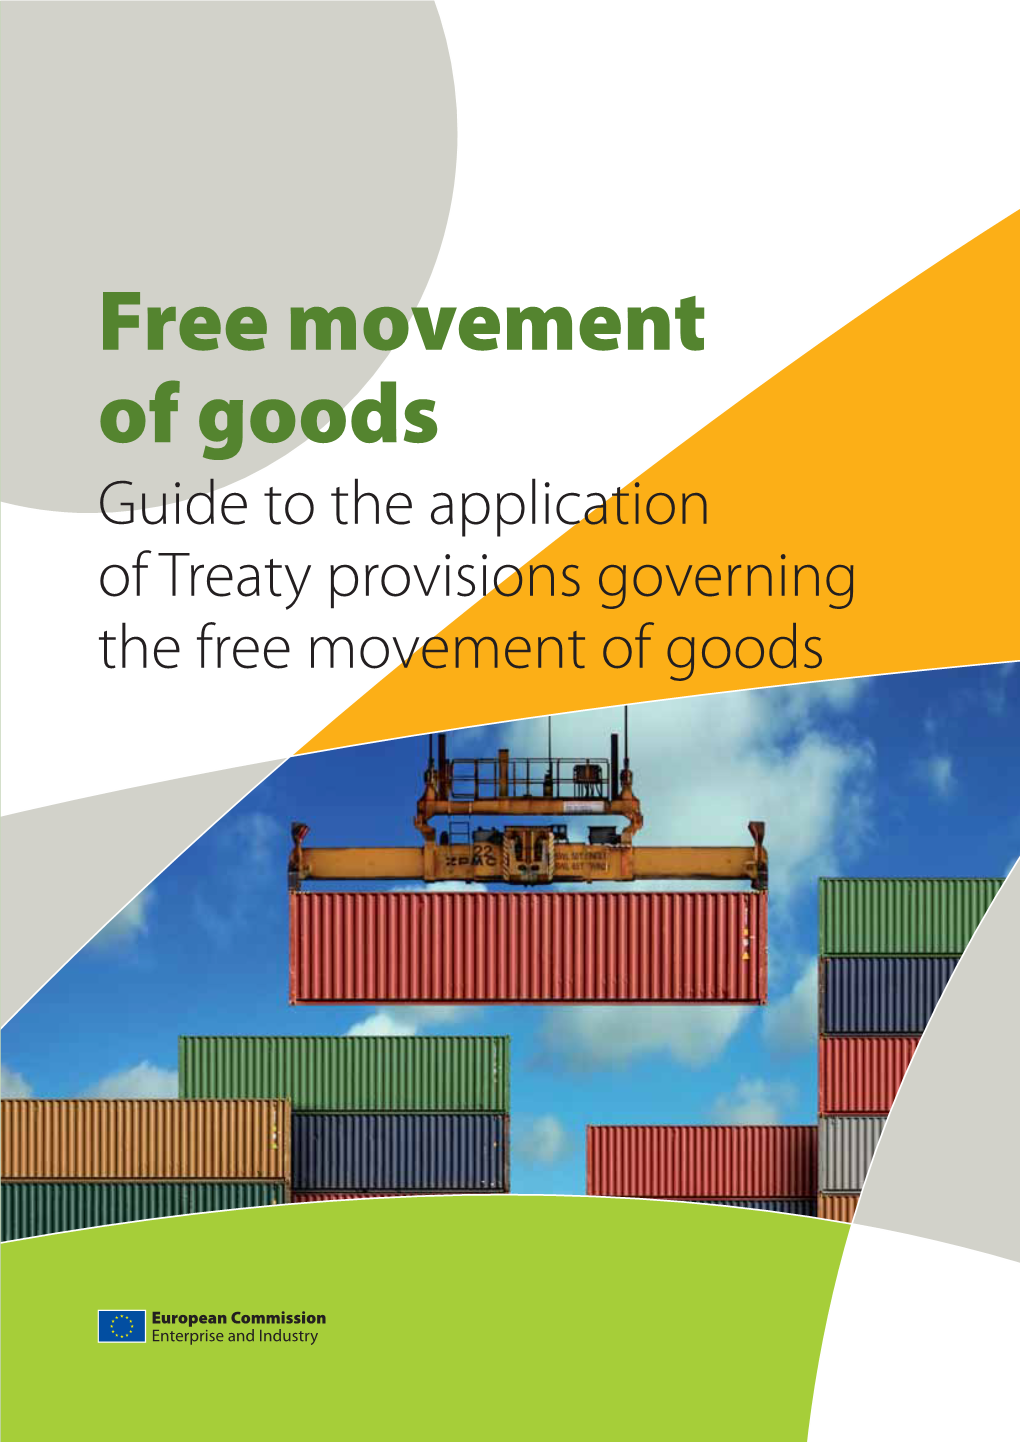 Guide to the Application of Treaty Provisions Governing the Free Movement of Goods